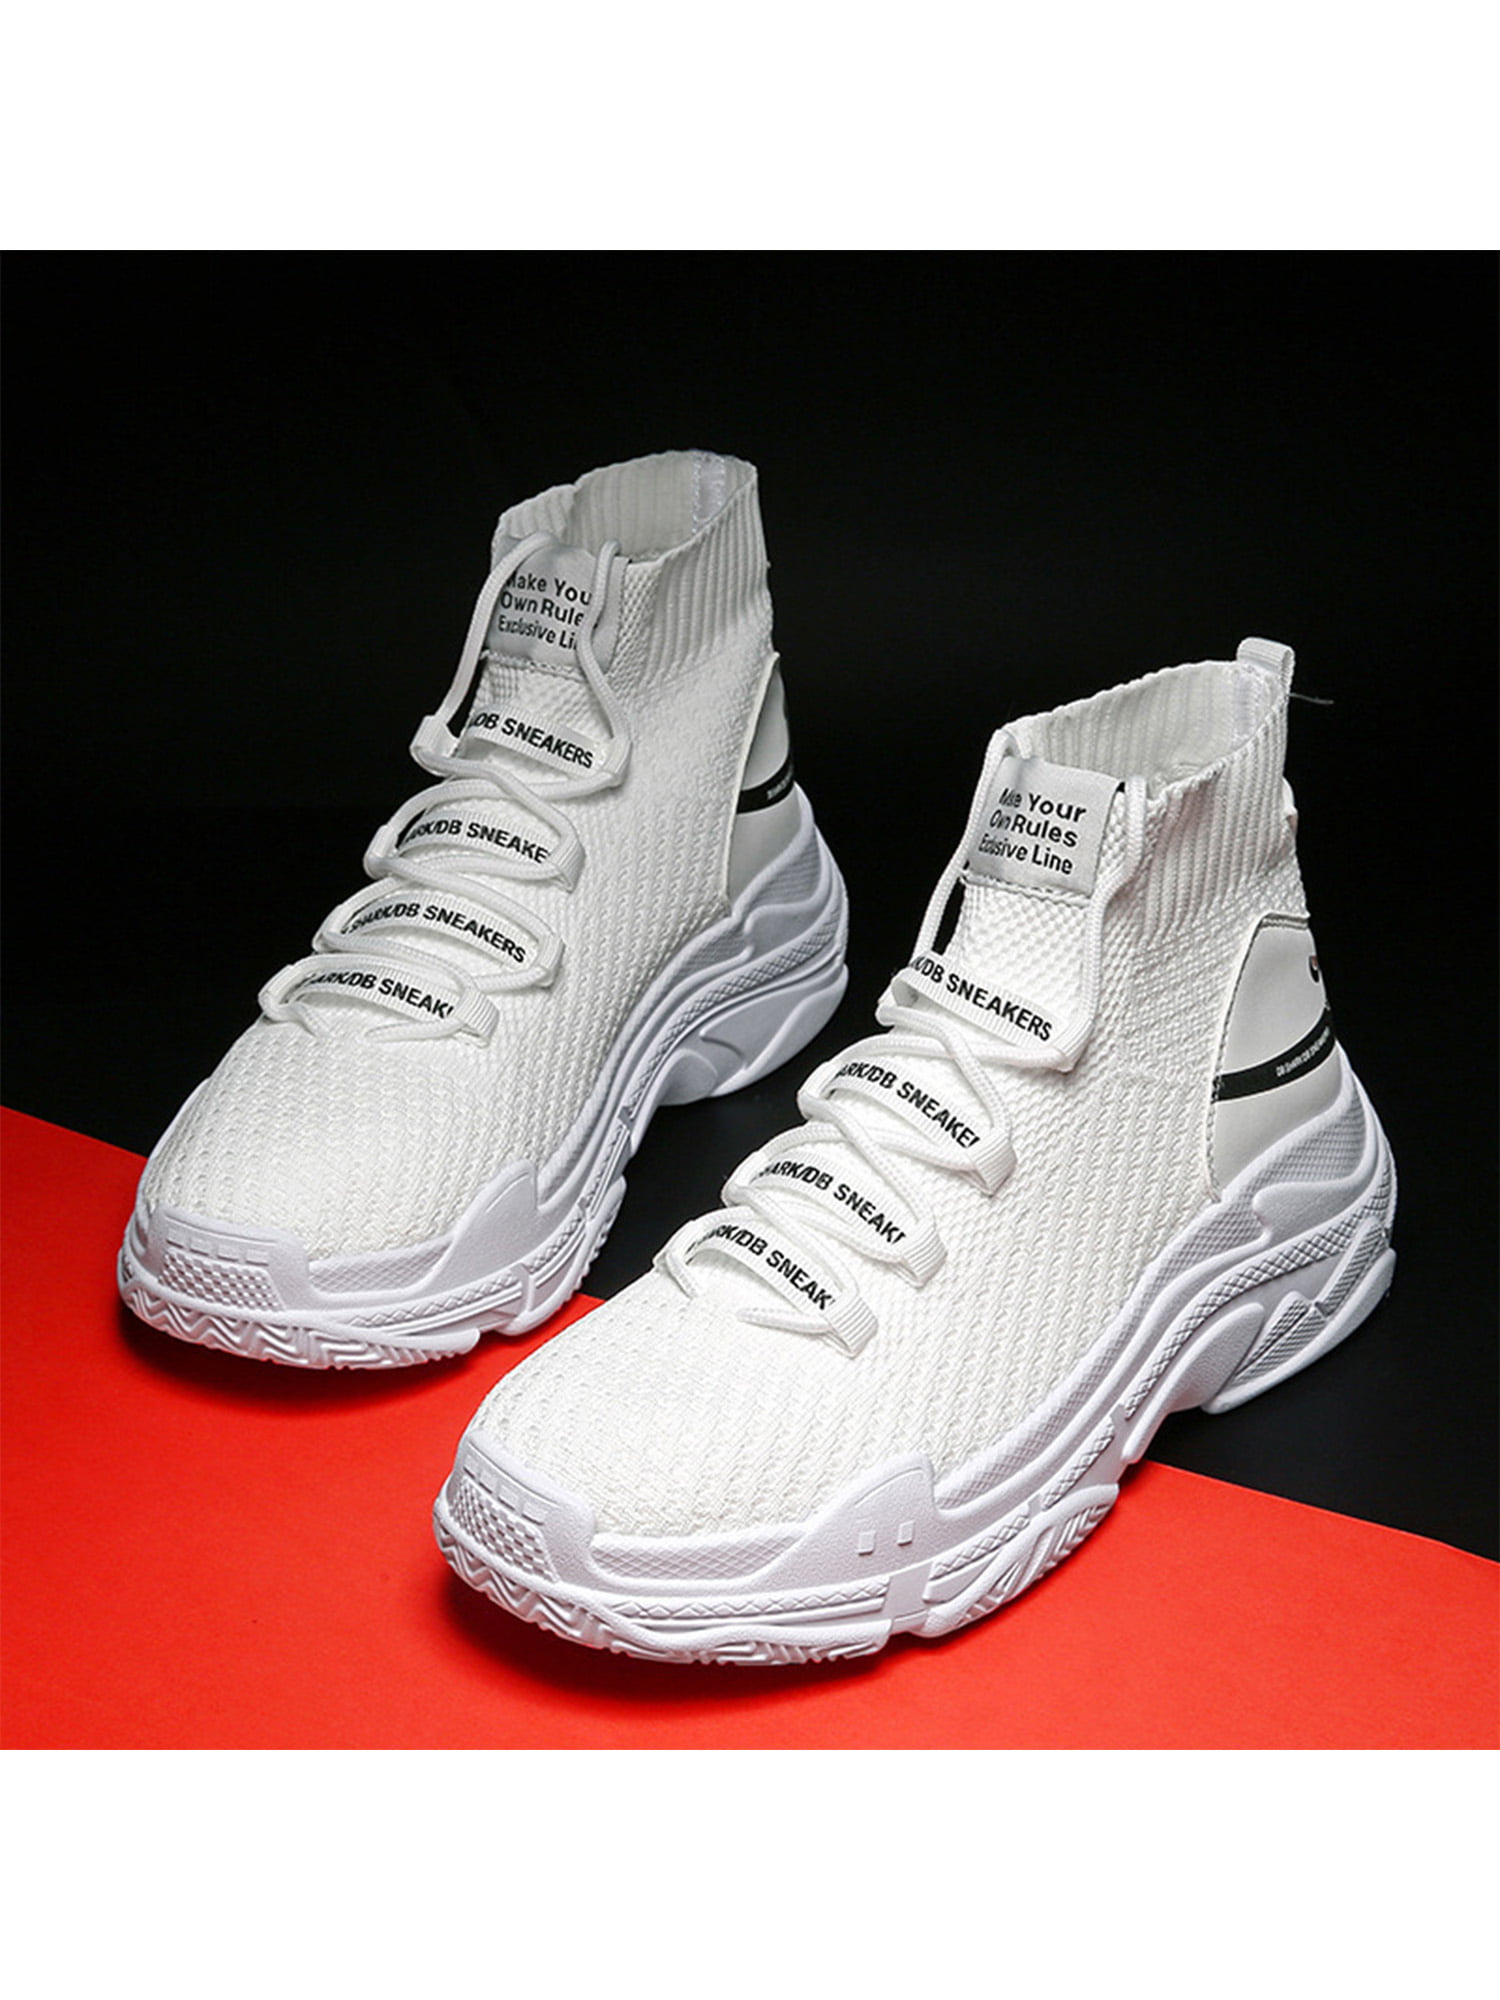 XIANV Women Men Running Shoes Breathable Slip On Sneakers Mesh Sport Athletic Fashion Tennis Comfort Fitness Walking Shoes